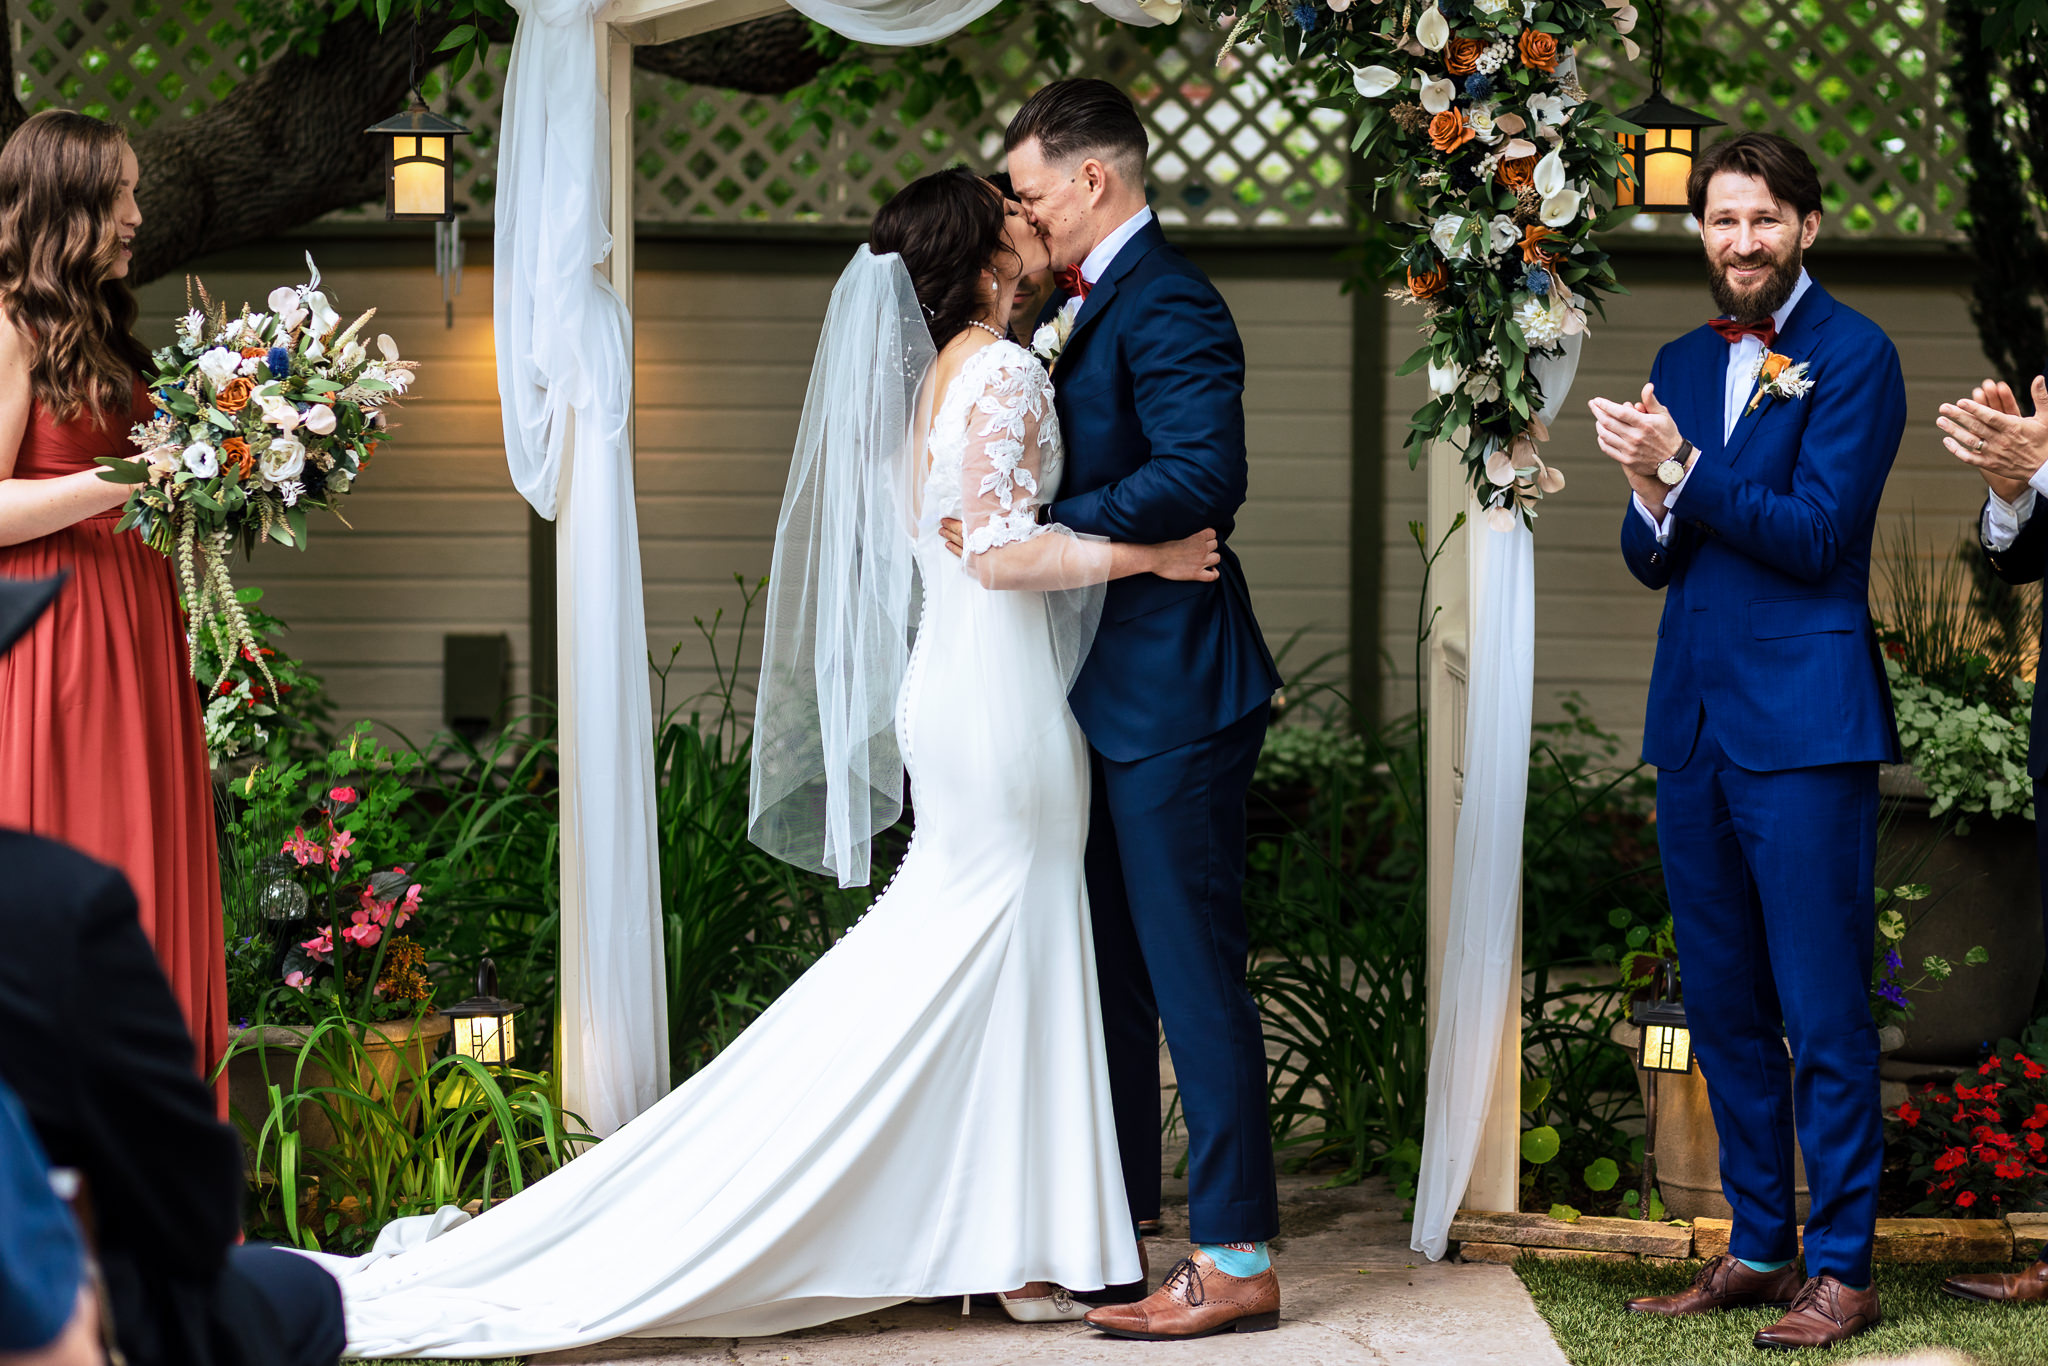 Bride & Groom kissing for the first time at the alter for Haley & Gytenis' Summer Wedding at The McCreery House by Colorado Wedding Photographer, Jennifer Garza.